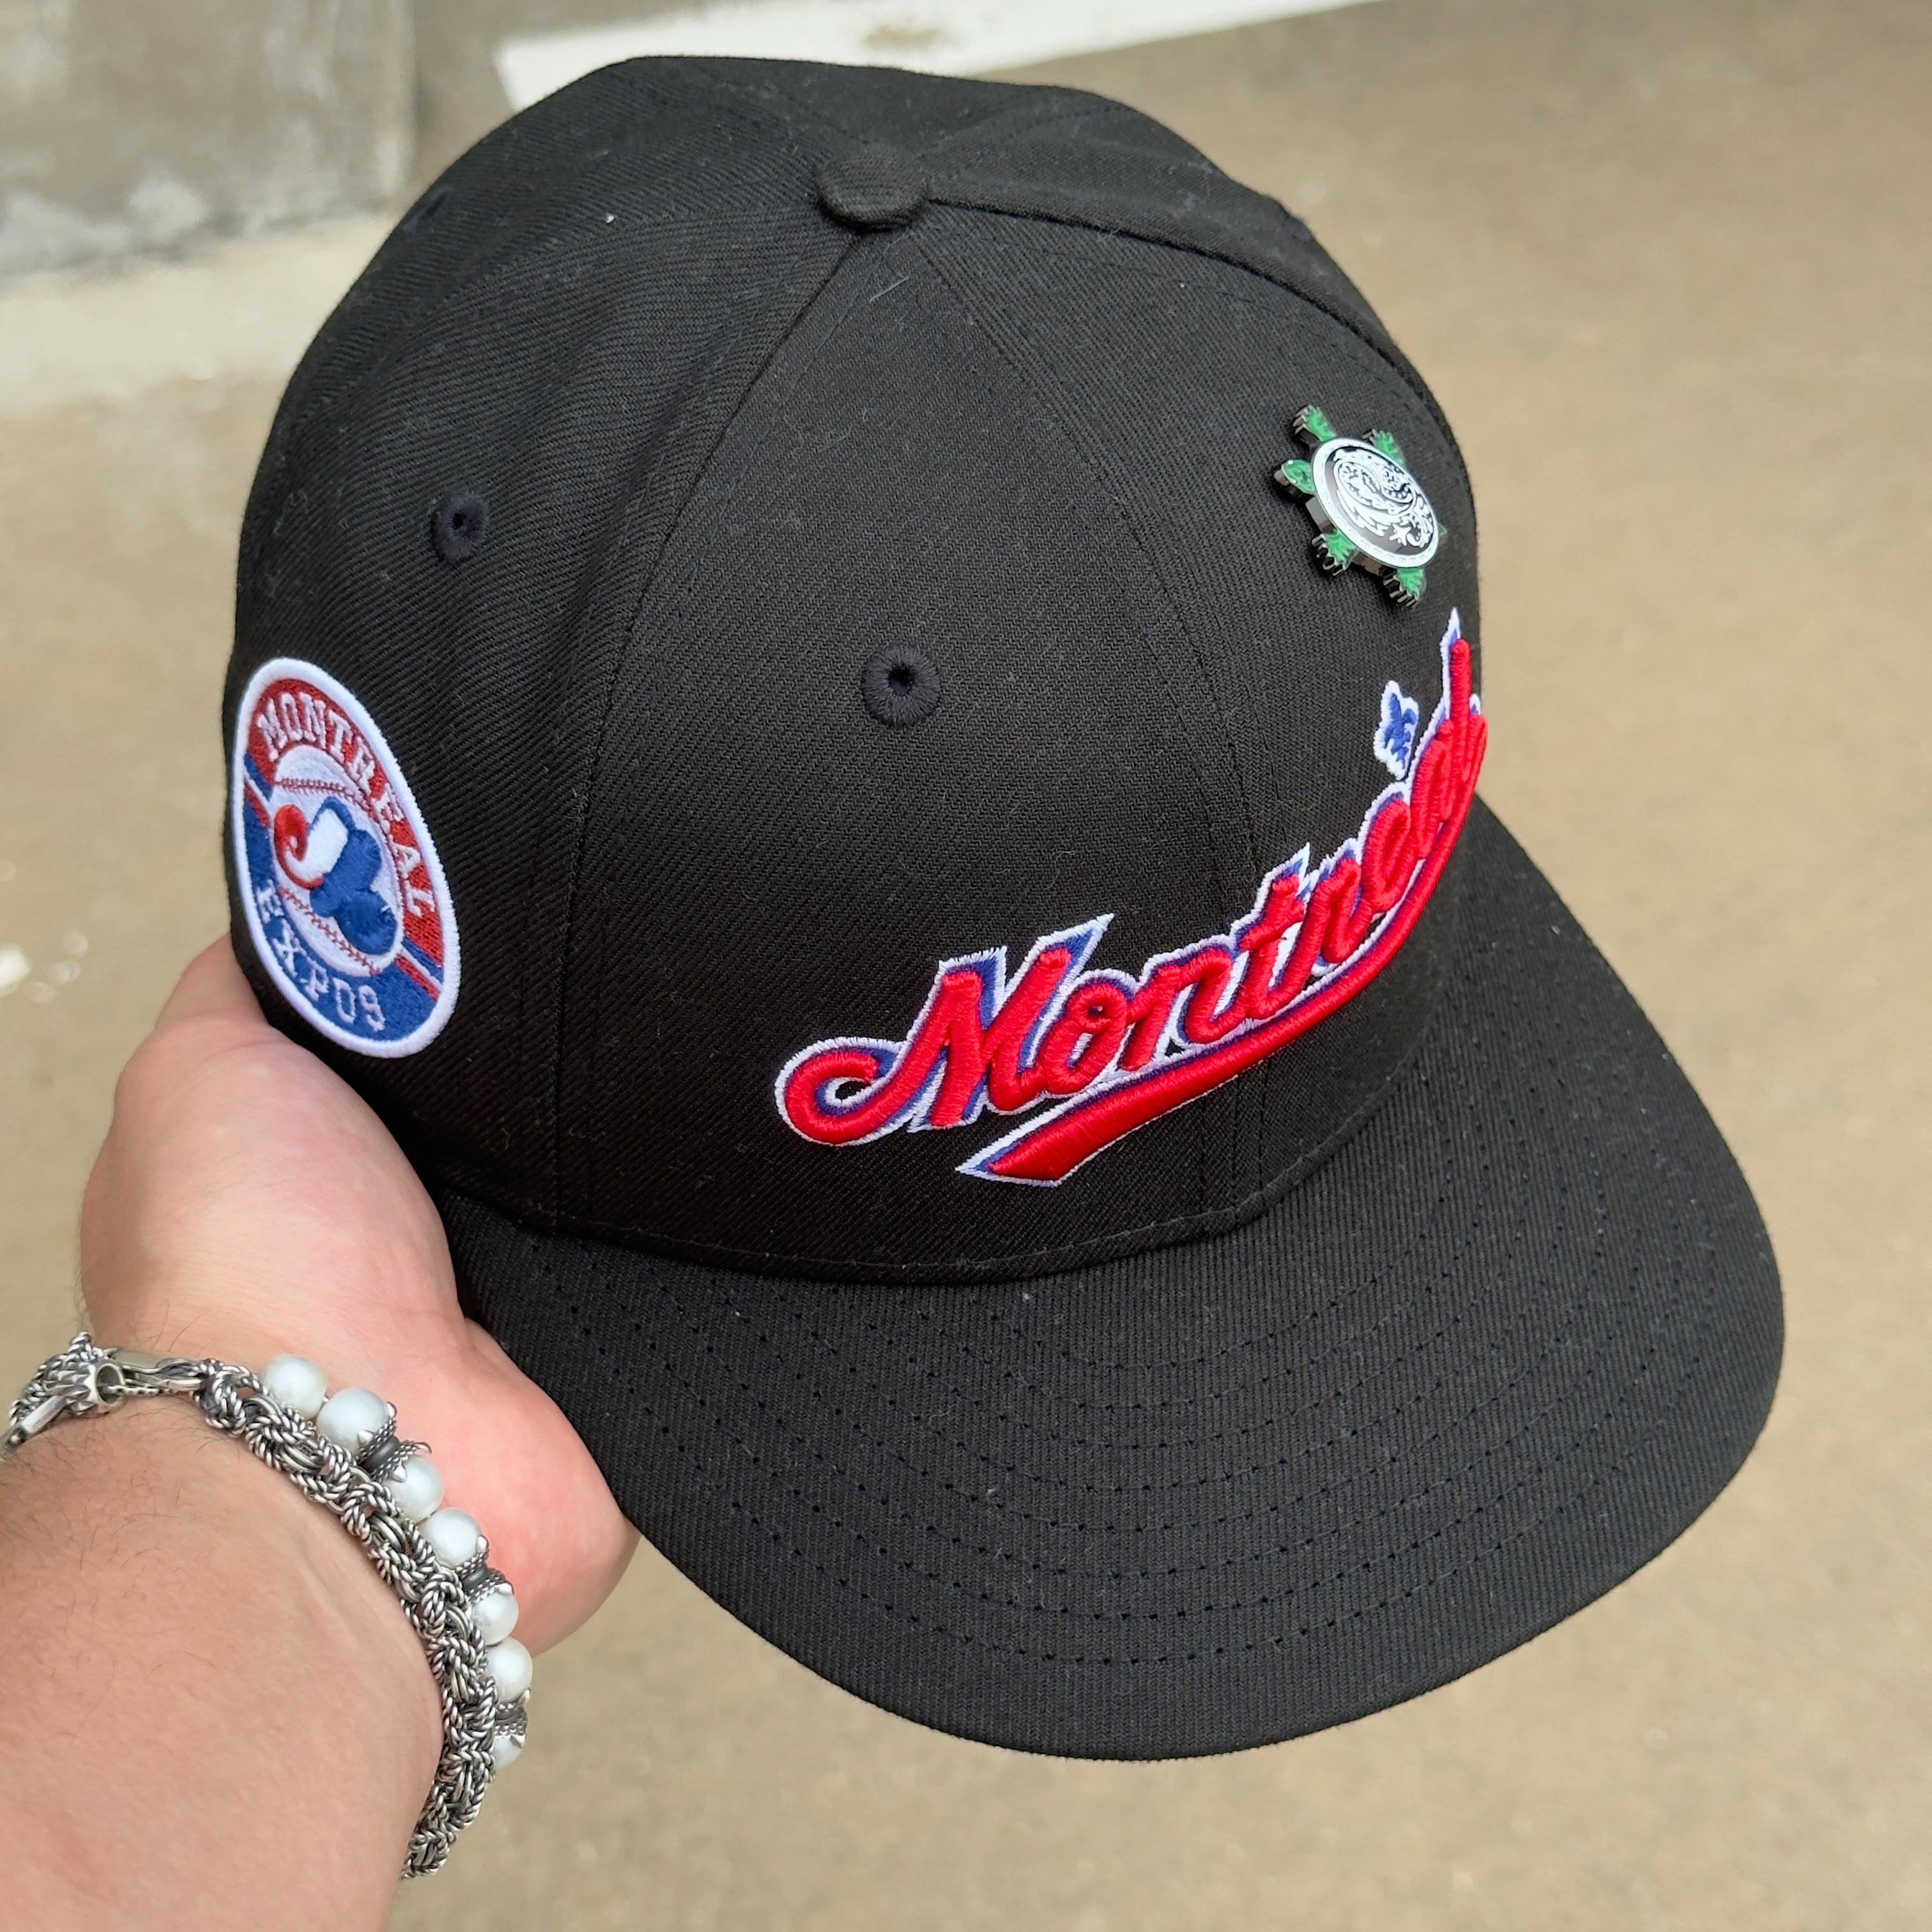 1/8 USED Black Montreal Expos Script Red Blue Anniversary 59fifty New Era Fitted Hat Cap